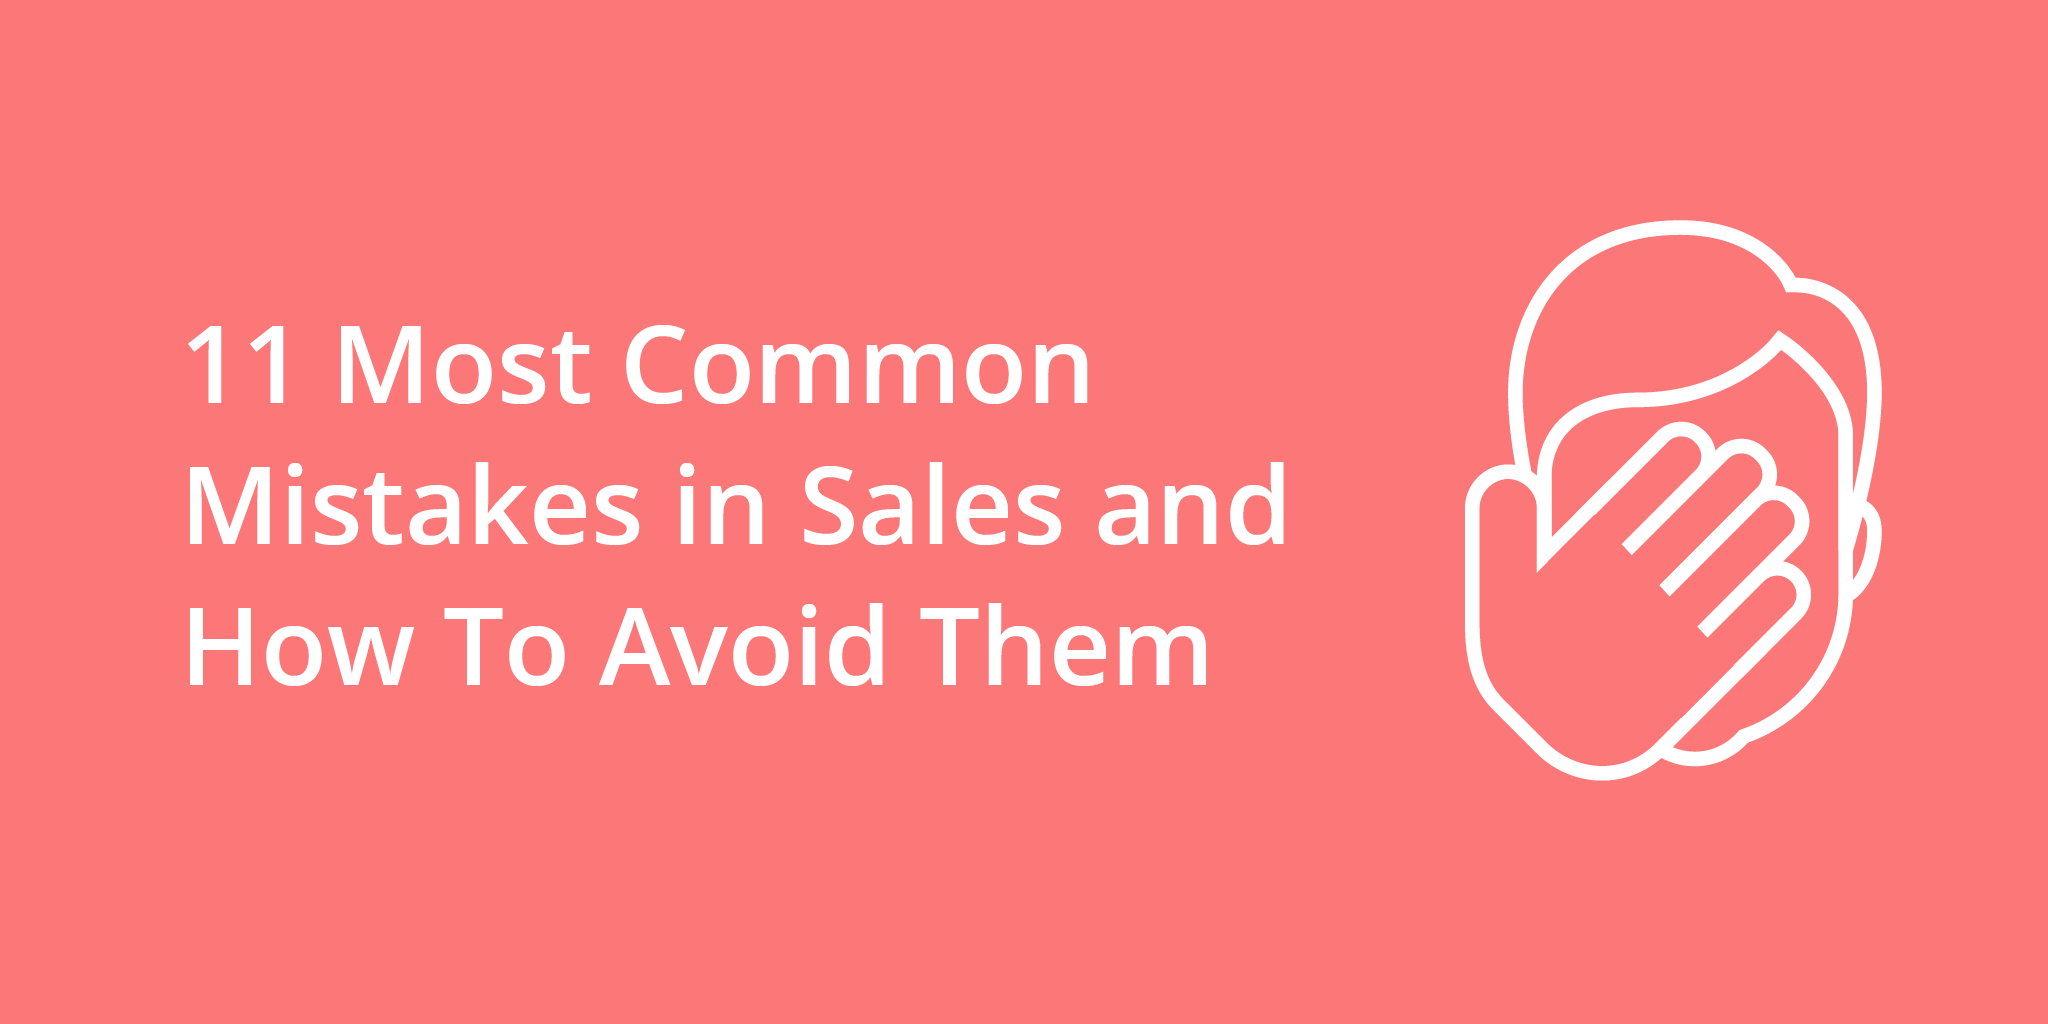 11 Most Common Mistakes in Sales and How To Avoid Them | Telephones for business